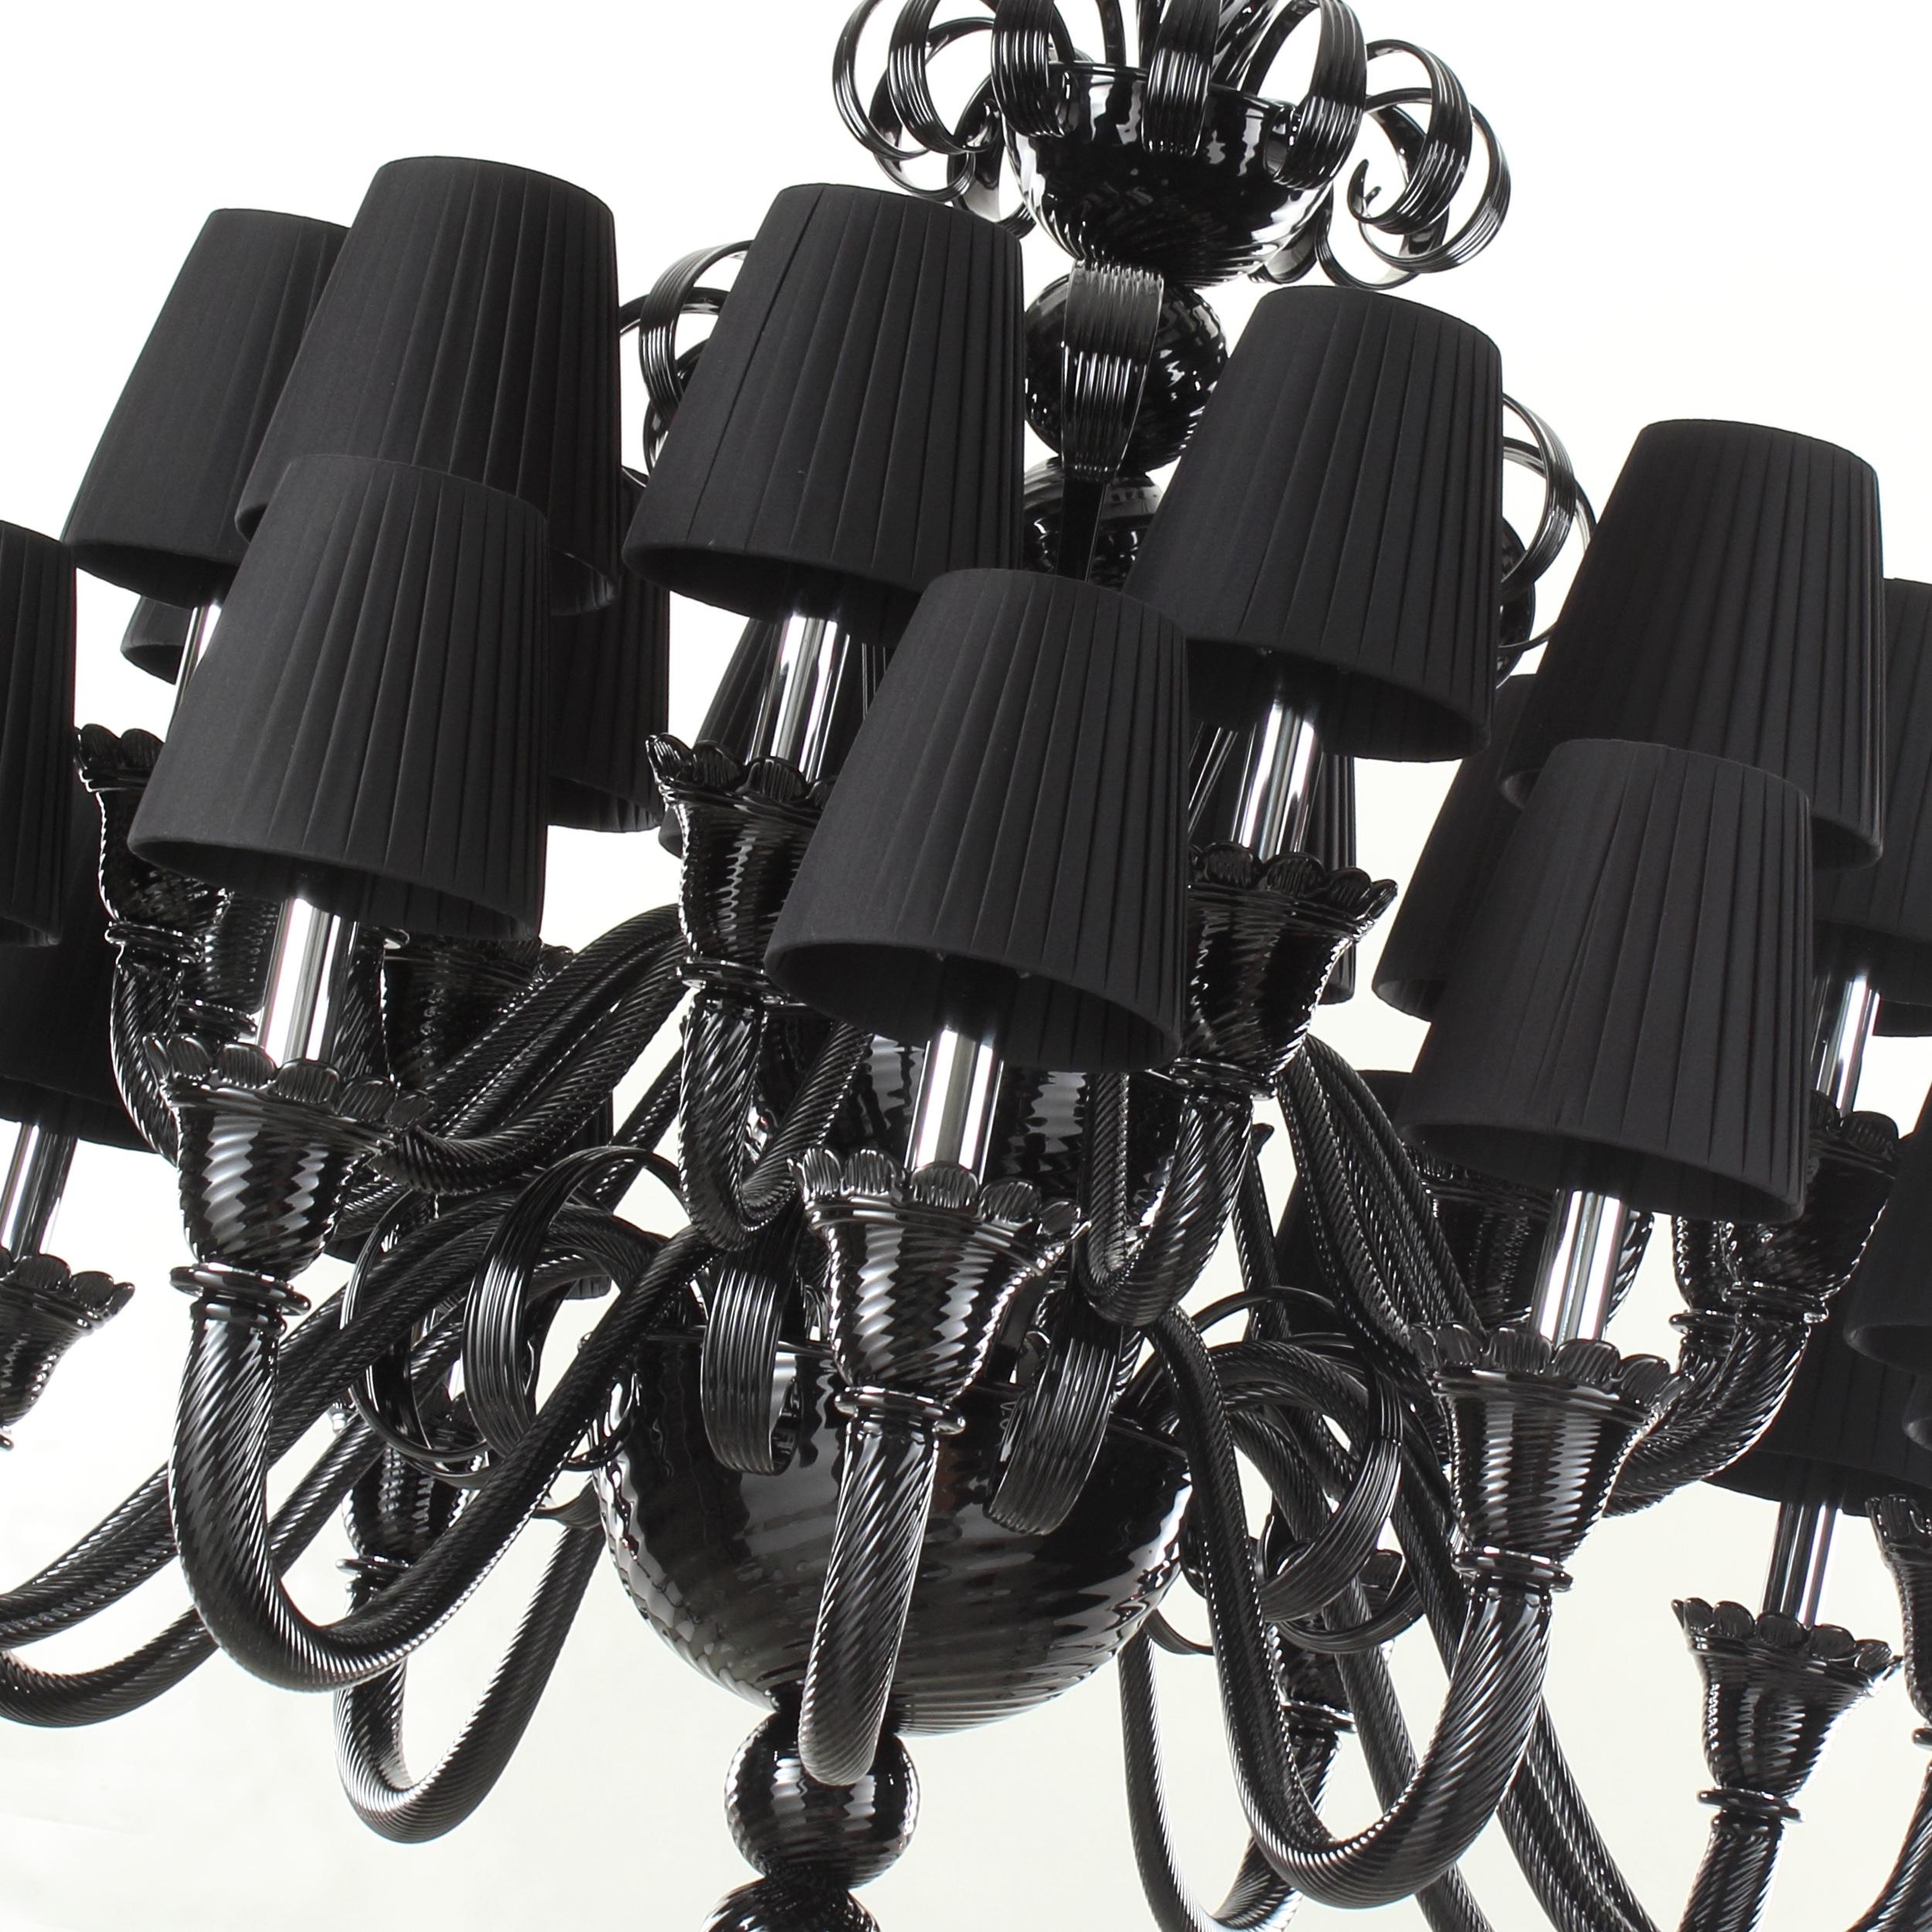 The luxury chandeliers IKO are a combination of glass elements designed with attention to details.The glass texture of this chandeliers is a combination of “rigamenà” (blown glass with twisted ribs) and “rigadin” (blown glass with straight ribs);